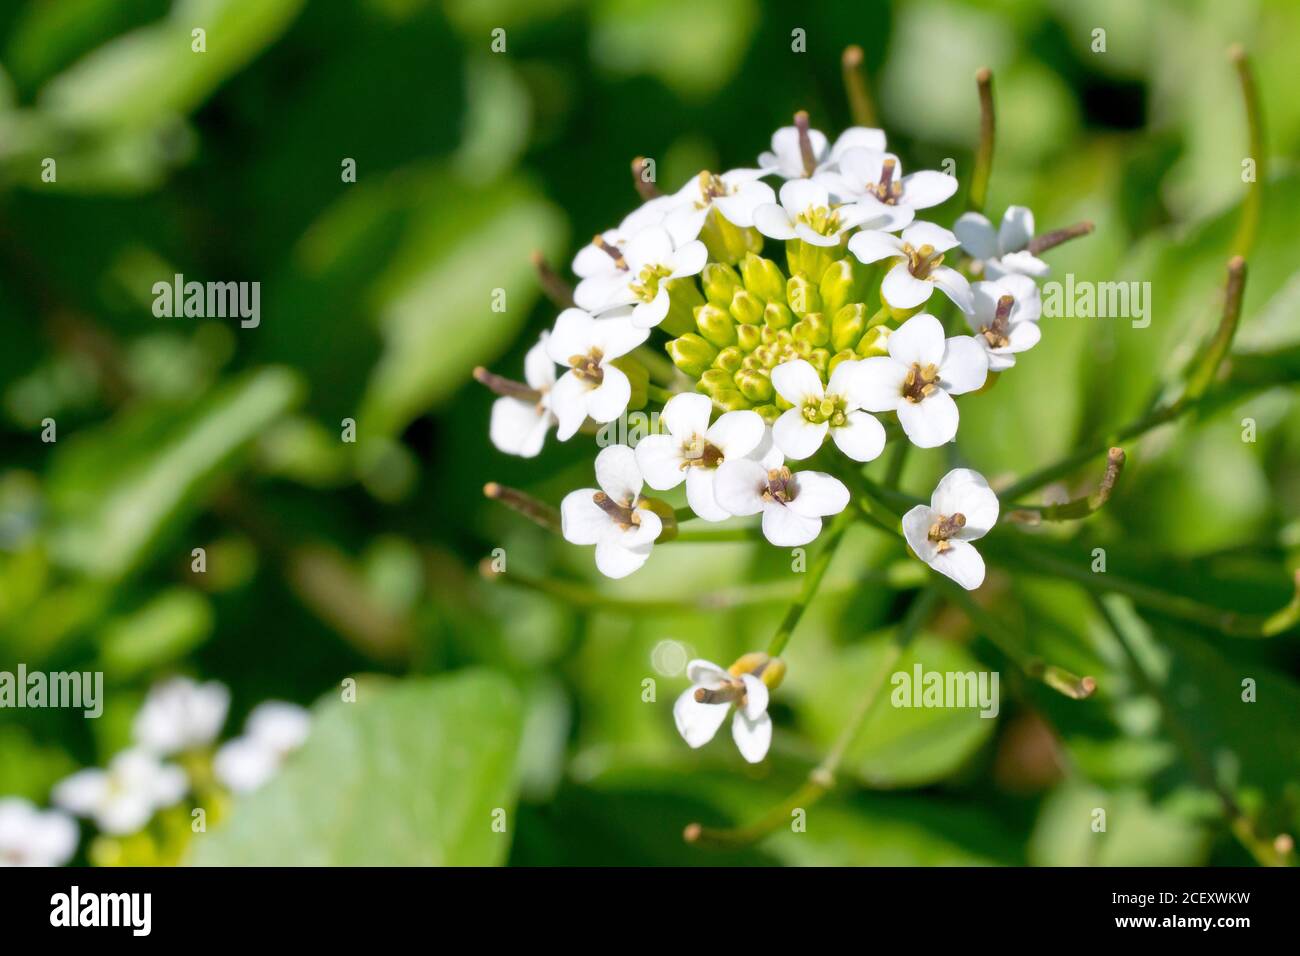 Watercress (nasturtium officinale), close up showing a single flower head with developing seed pods. Stock Photo